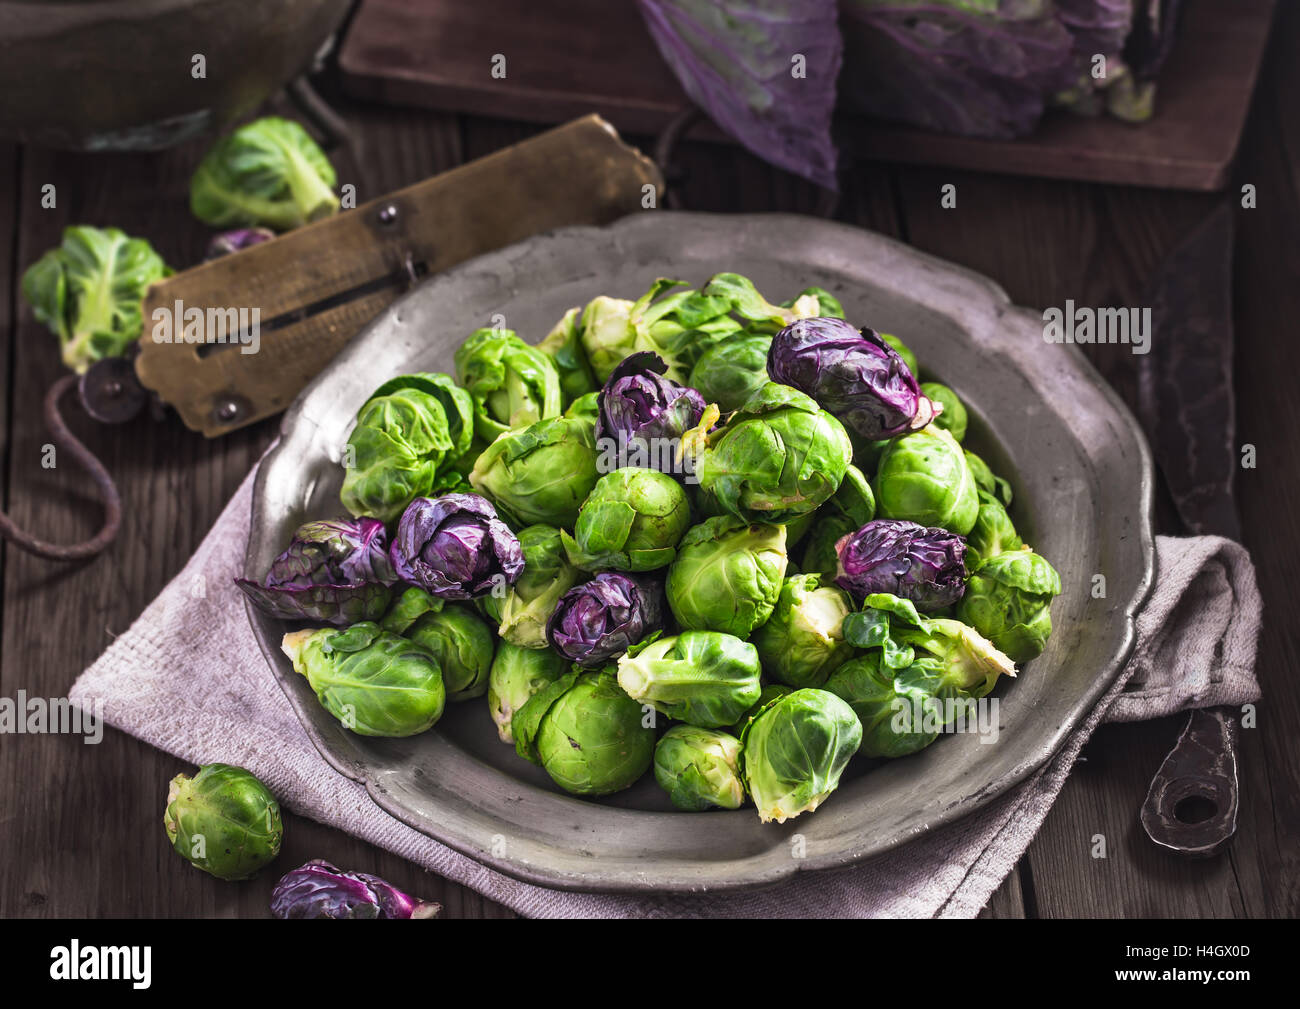 Uncooked Brussels sprouts Stock Photo